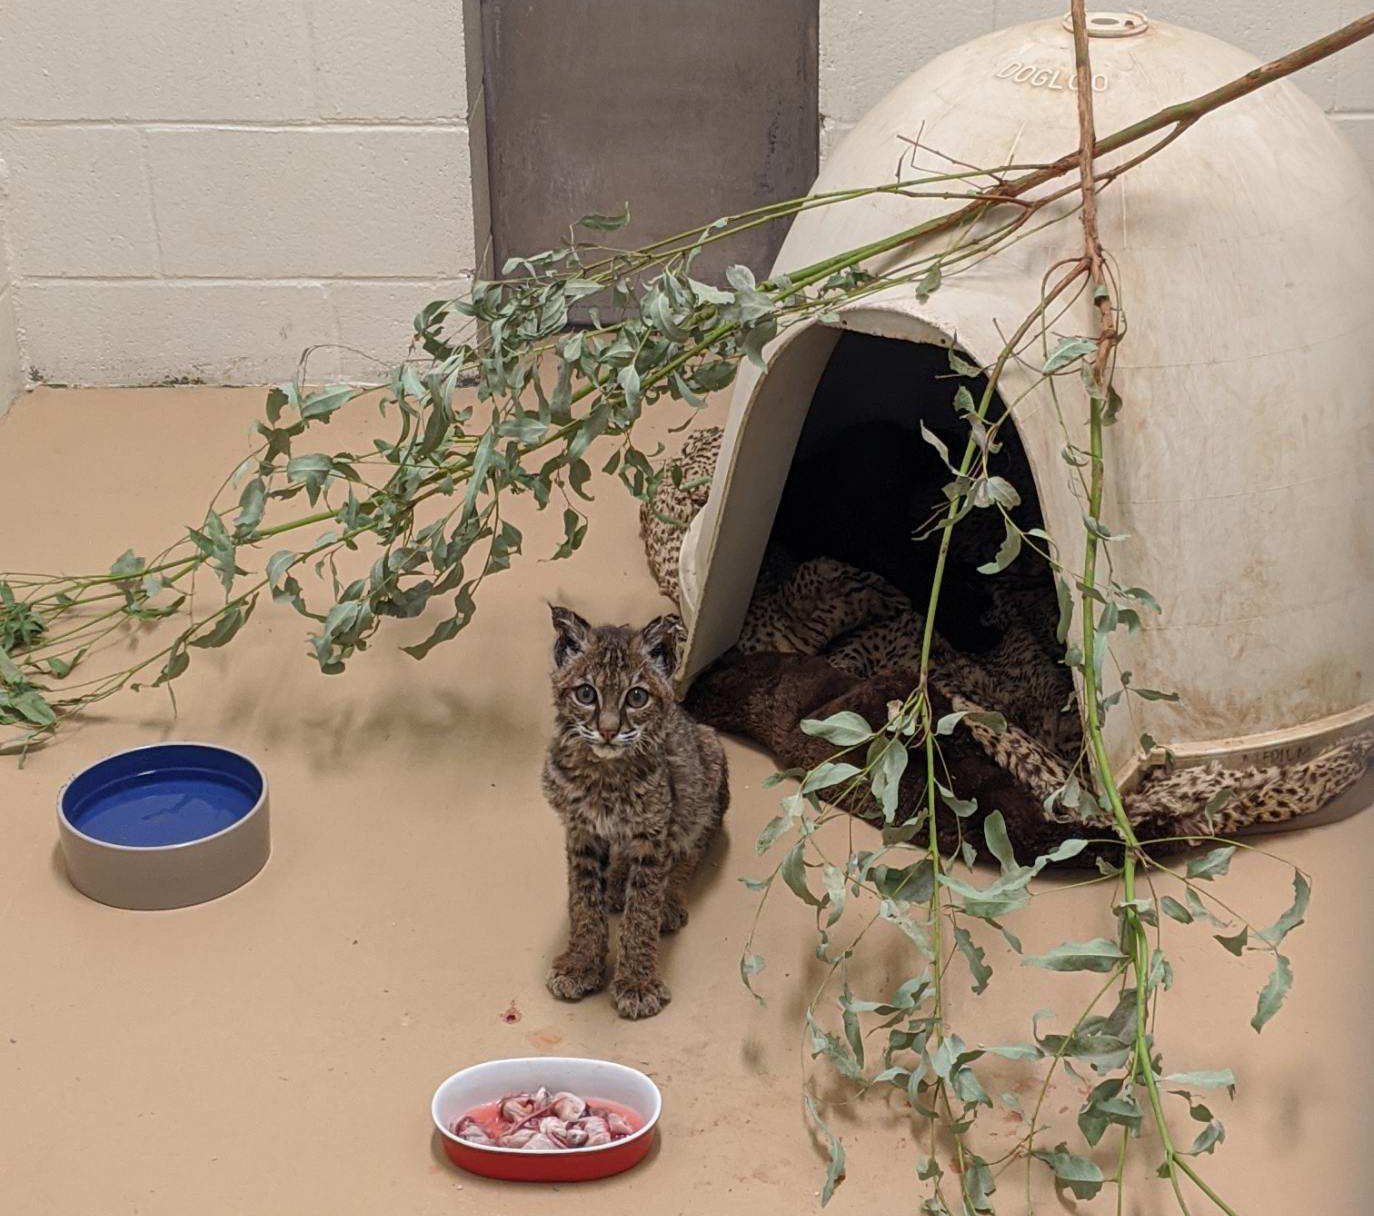 A 6-8 month old emale bobcat at the San Diego Humane Society’s Ramona Wildlife Center;